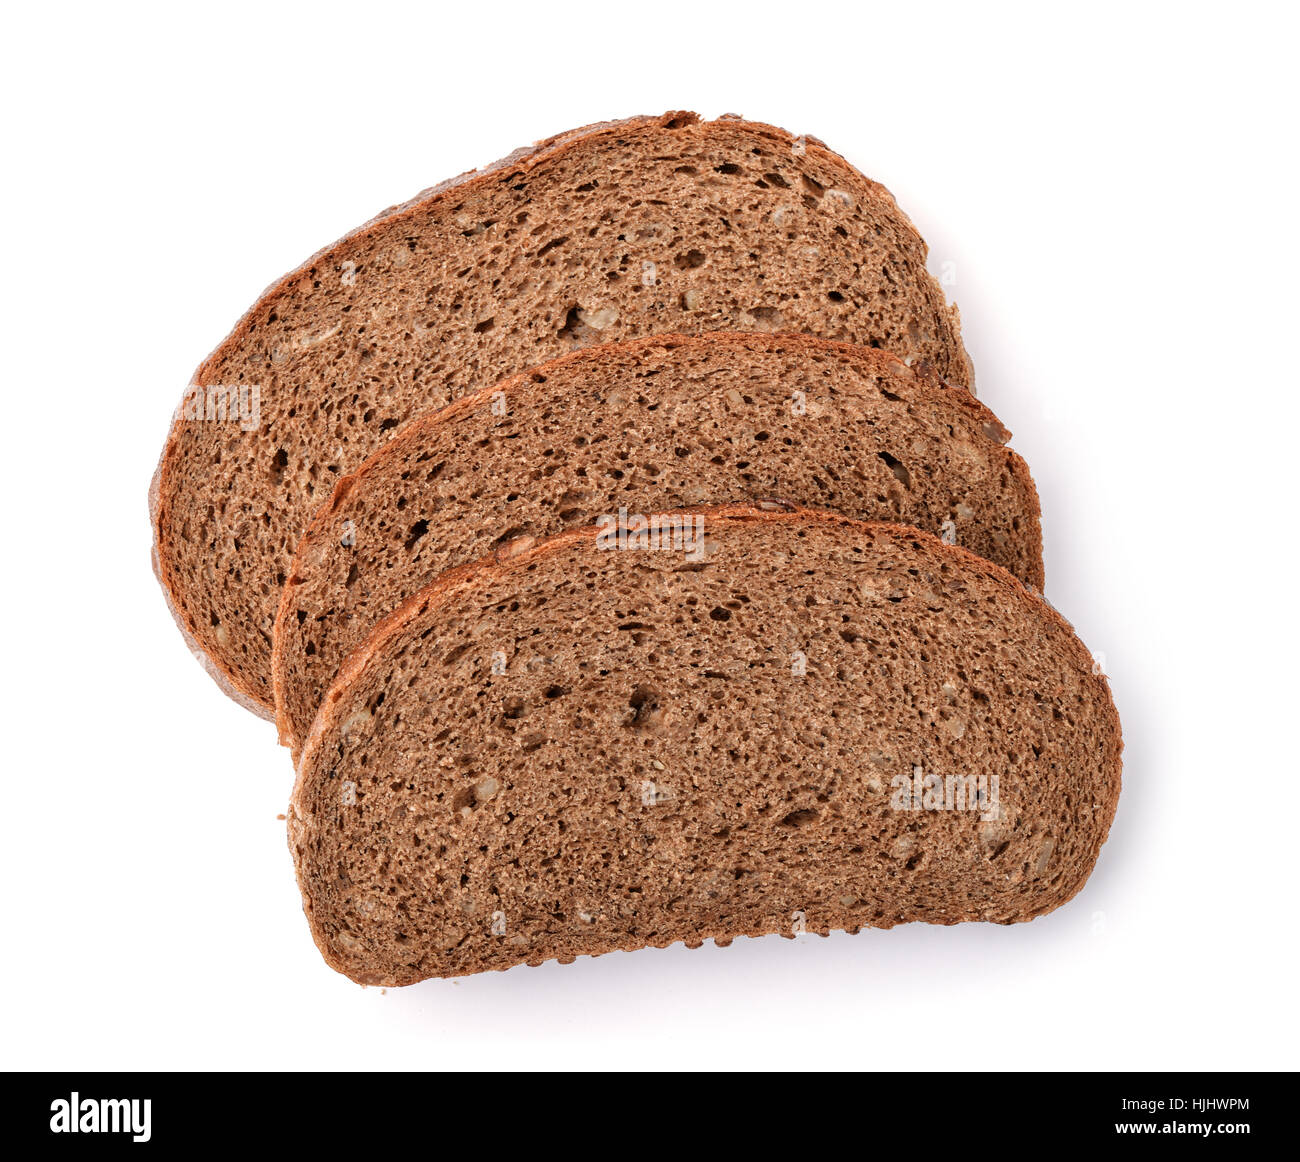 Three slices of rye bread with bran isolated on white Stock Photo